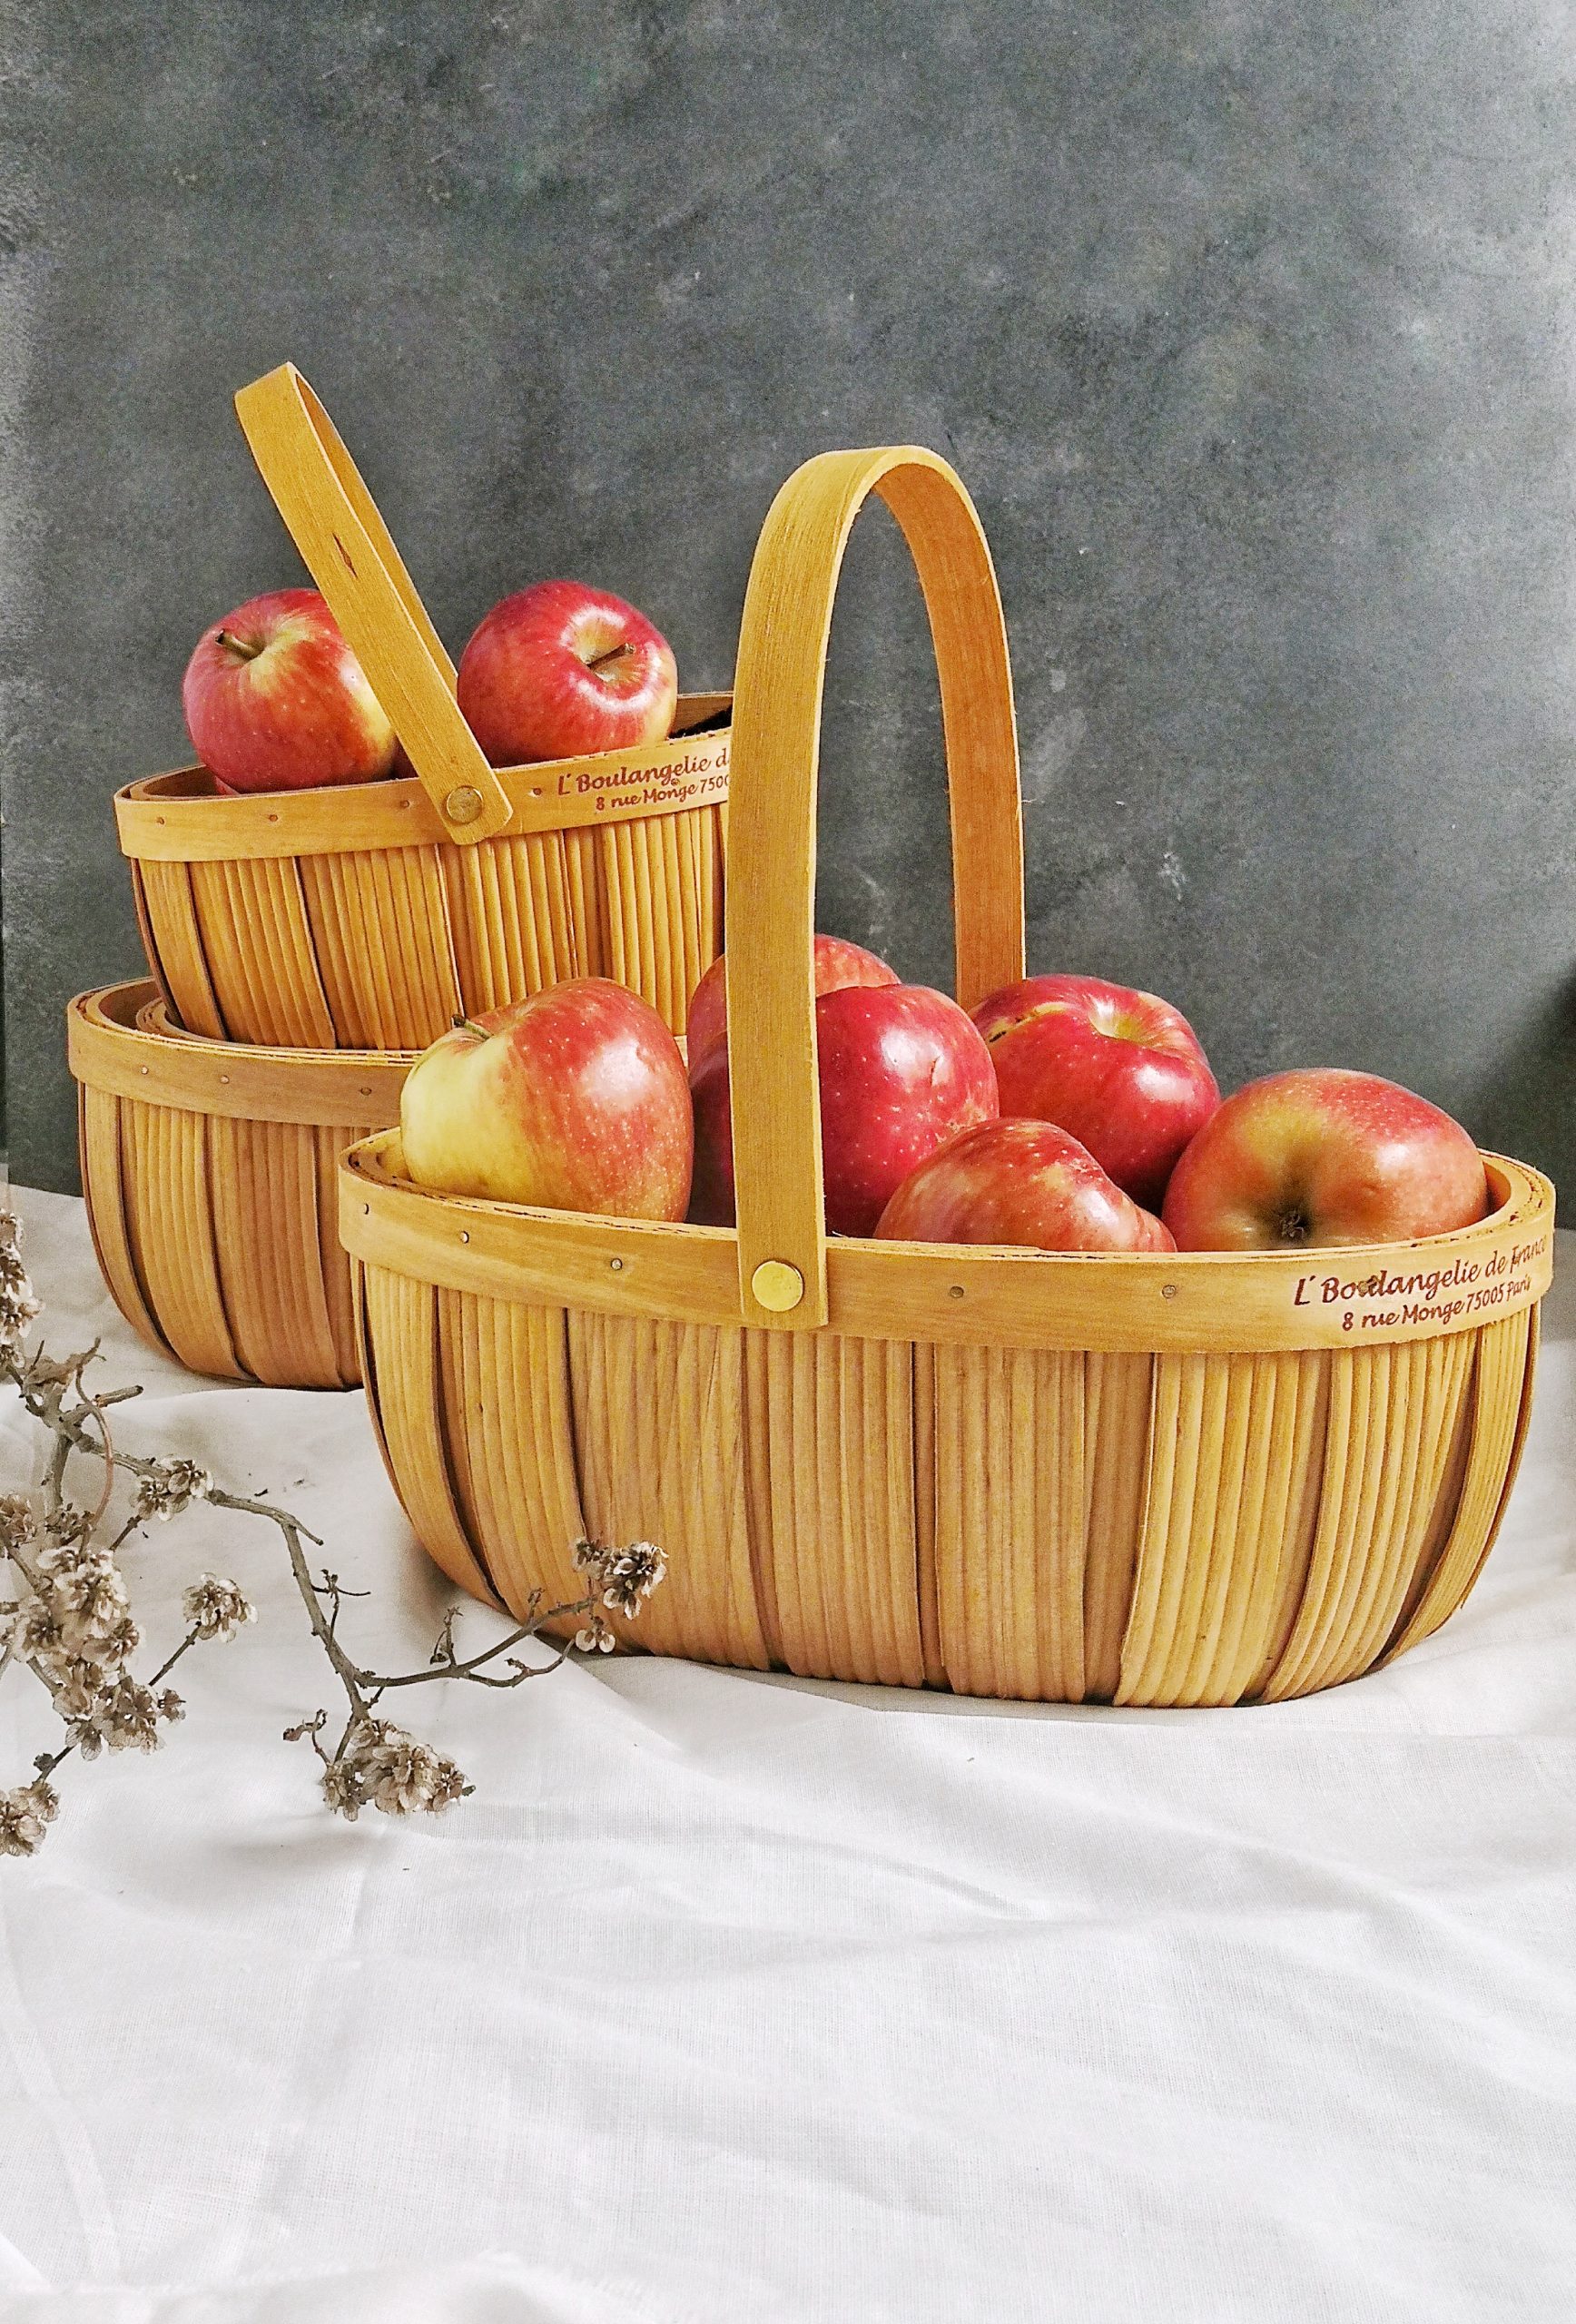 Wooden Baskets with Handle – Best for Home Decor, Storage and Gift Baskets